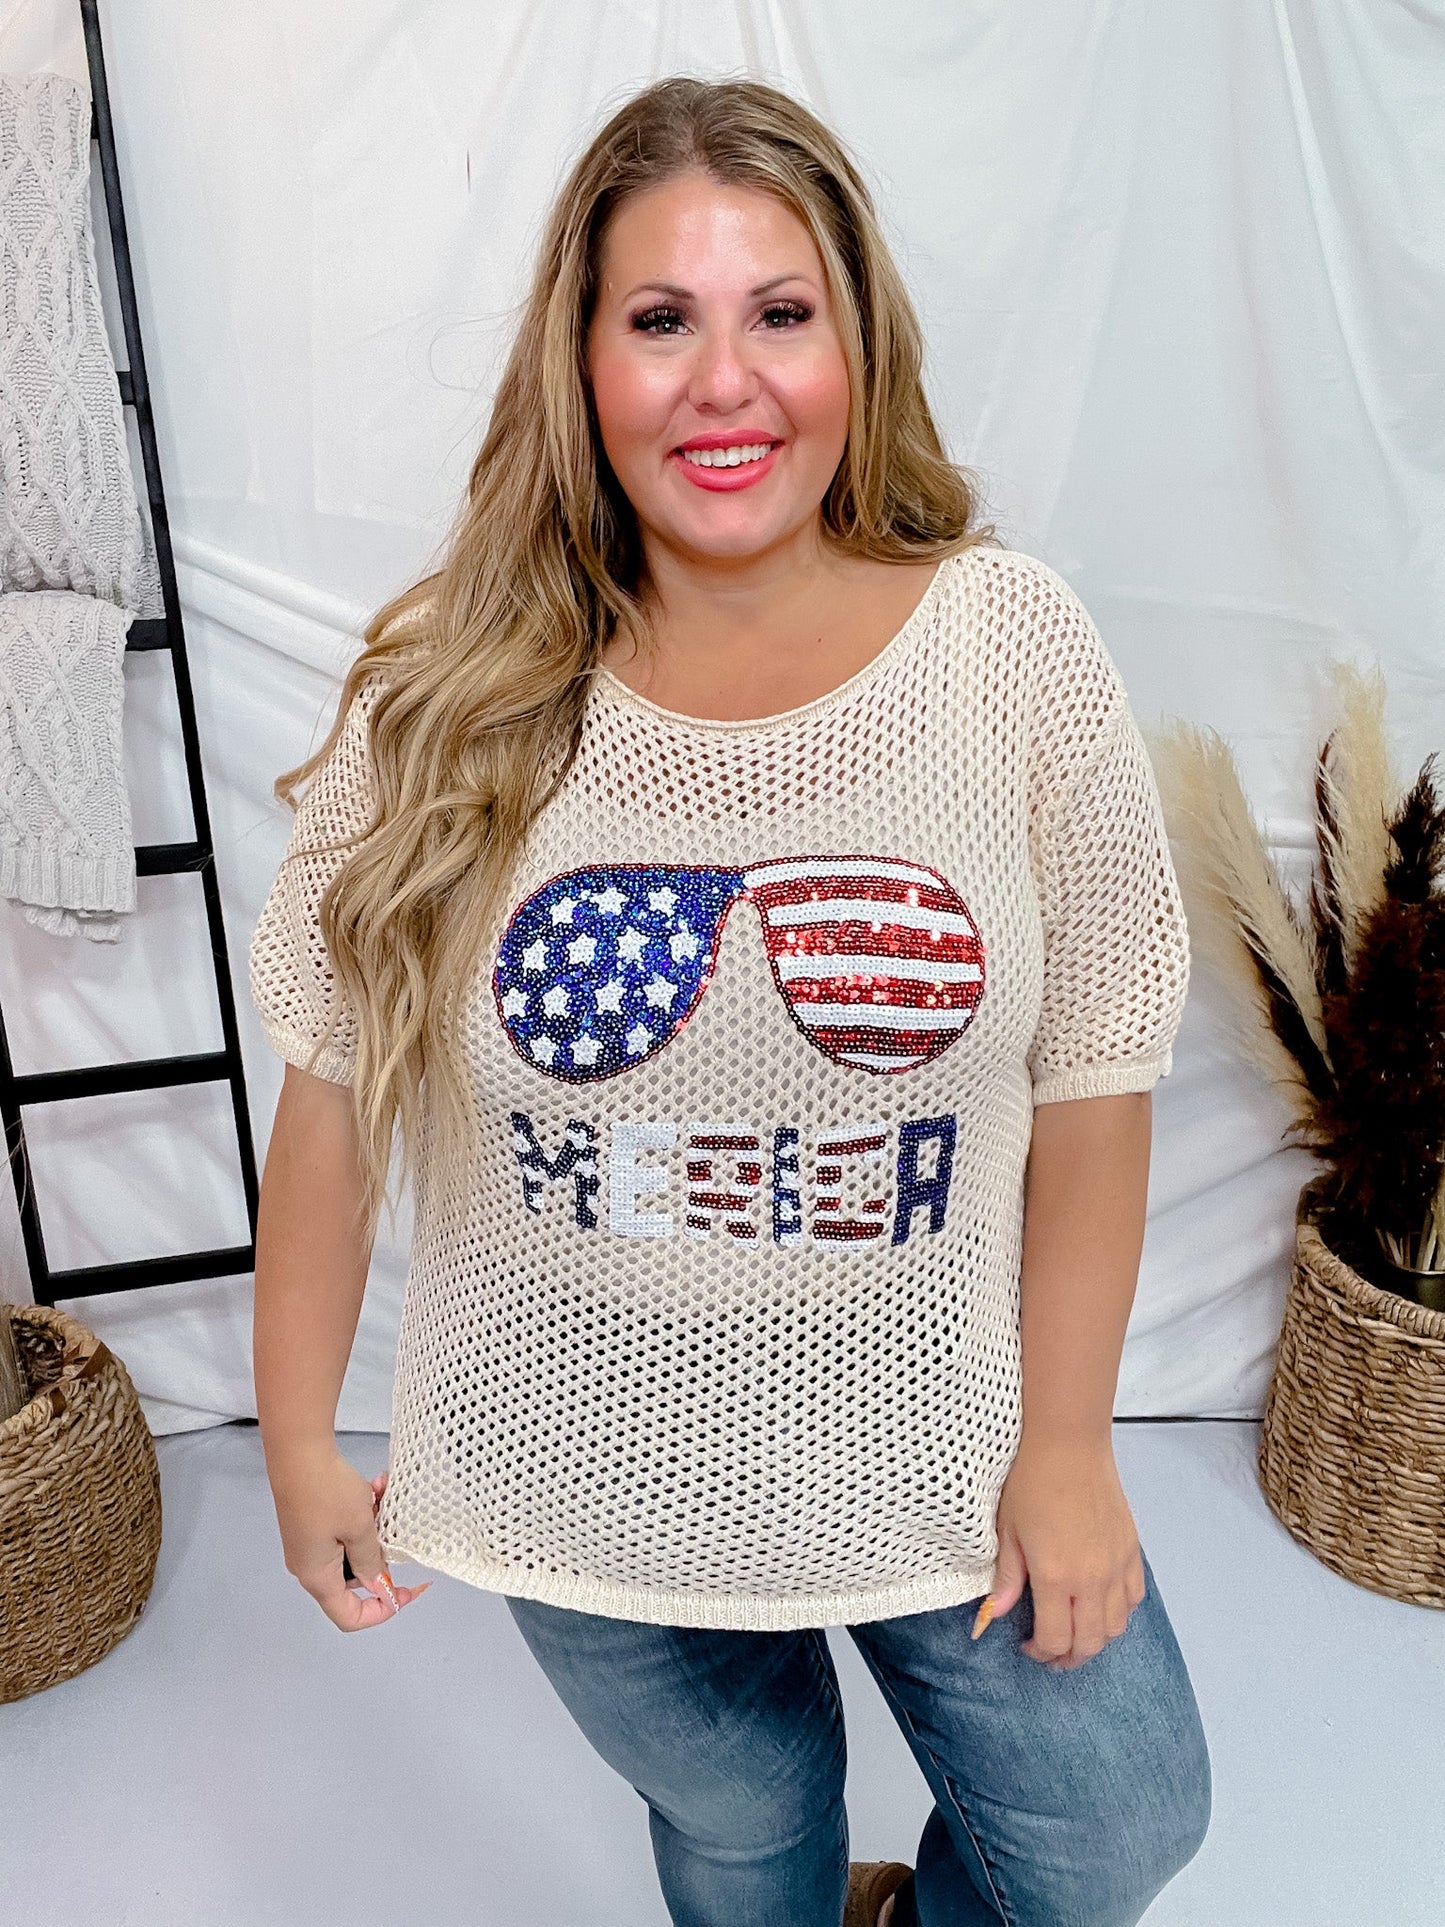 Sequin 'Merica Sunglasses Open Knit Cover Up Top - Whiskey Skies - BIBI